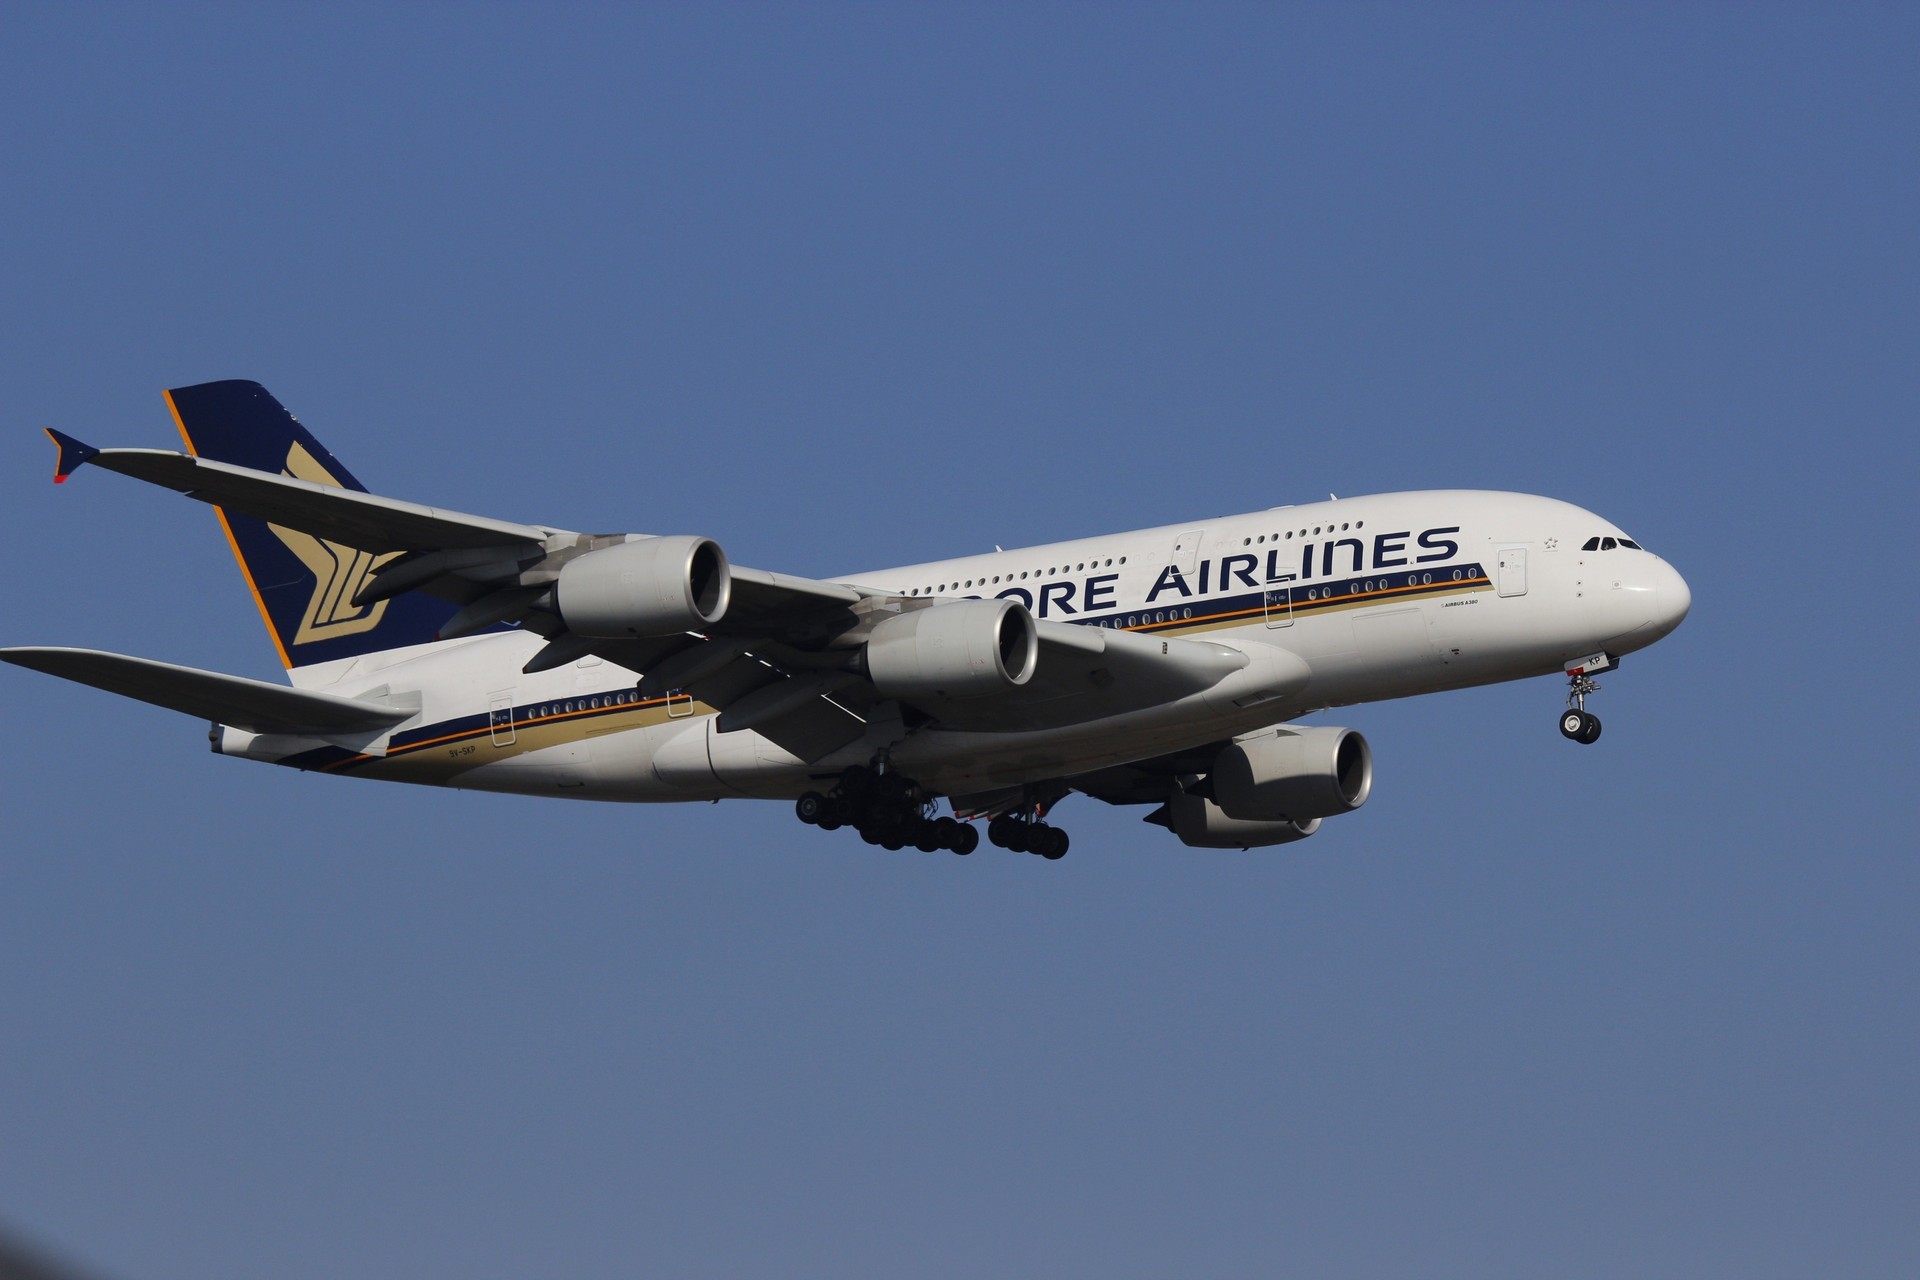 1920x1280 Airbus A 380 Singapore Airlines Wallpaper 1920Ã1280 ...